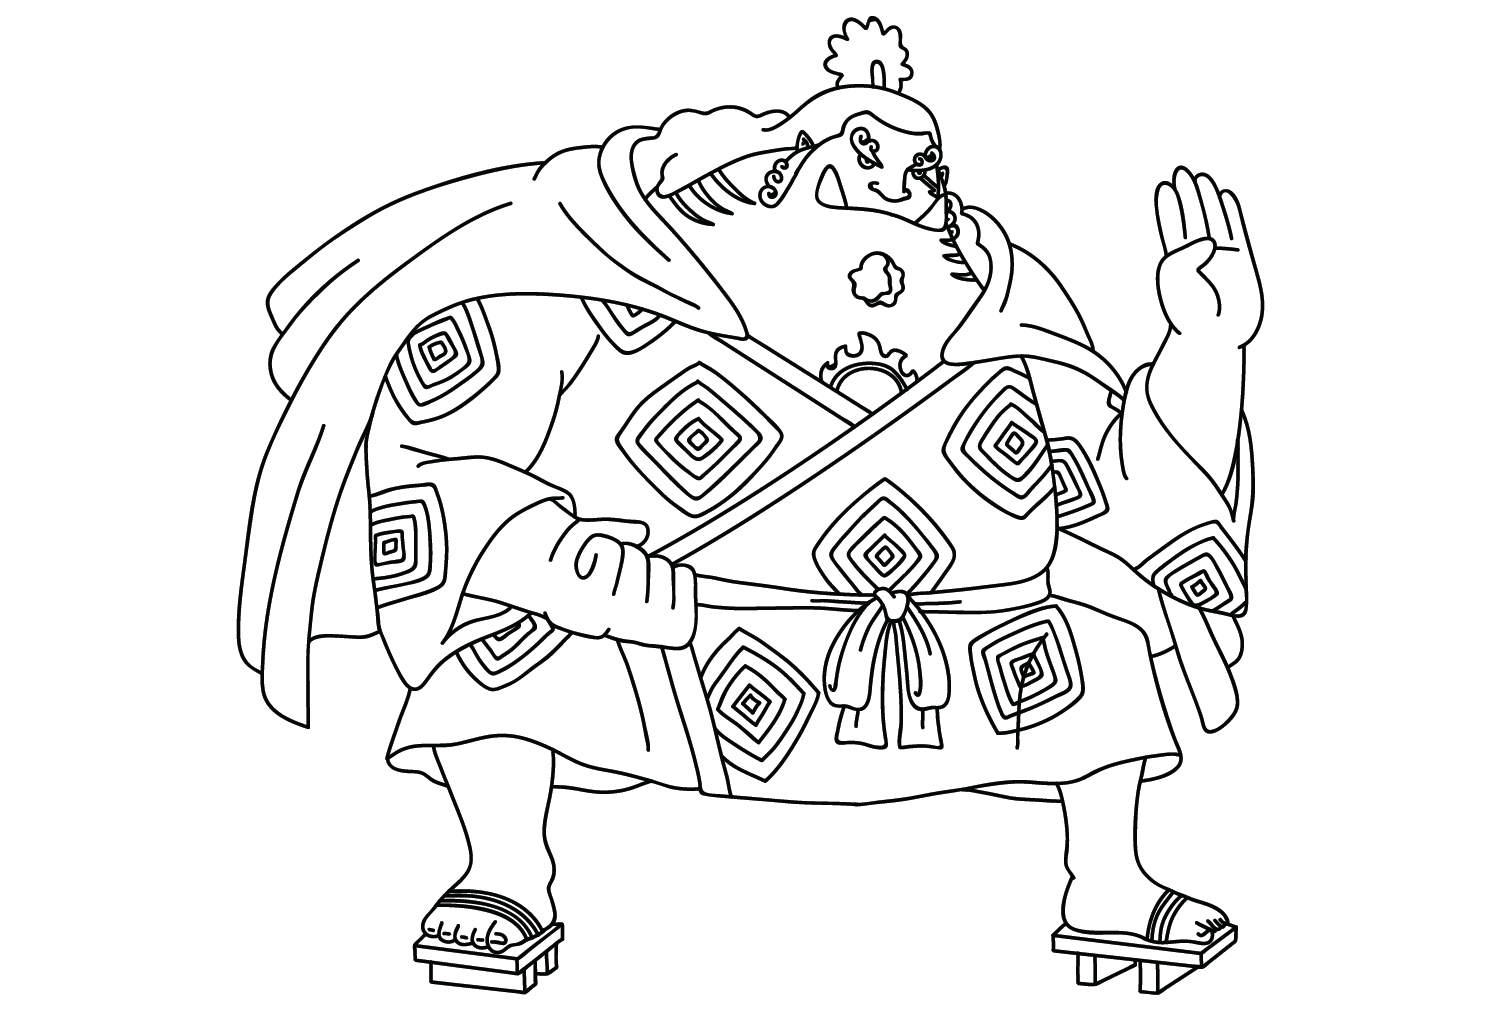 Jinbe Coloring Sheet for Kids from Jinbe